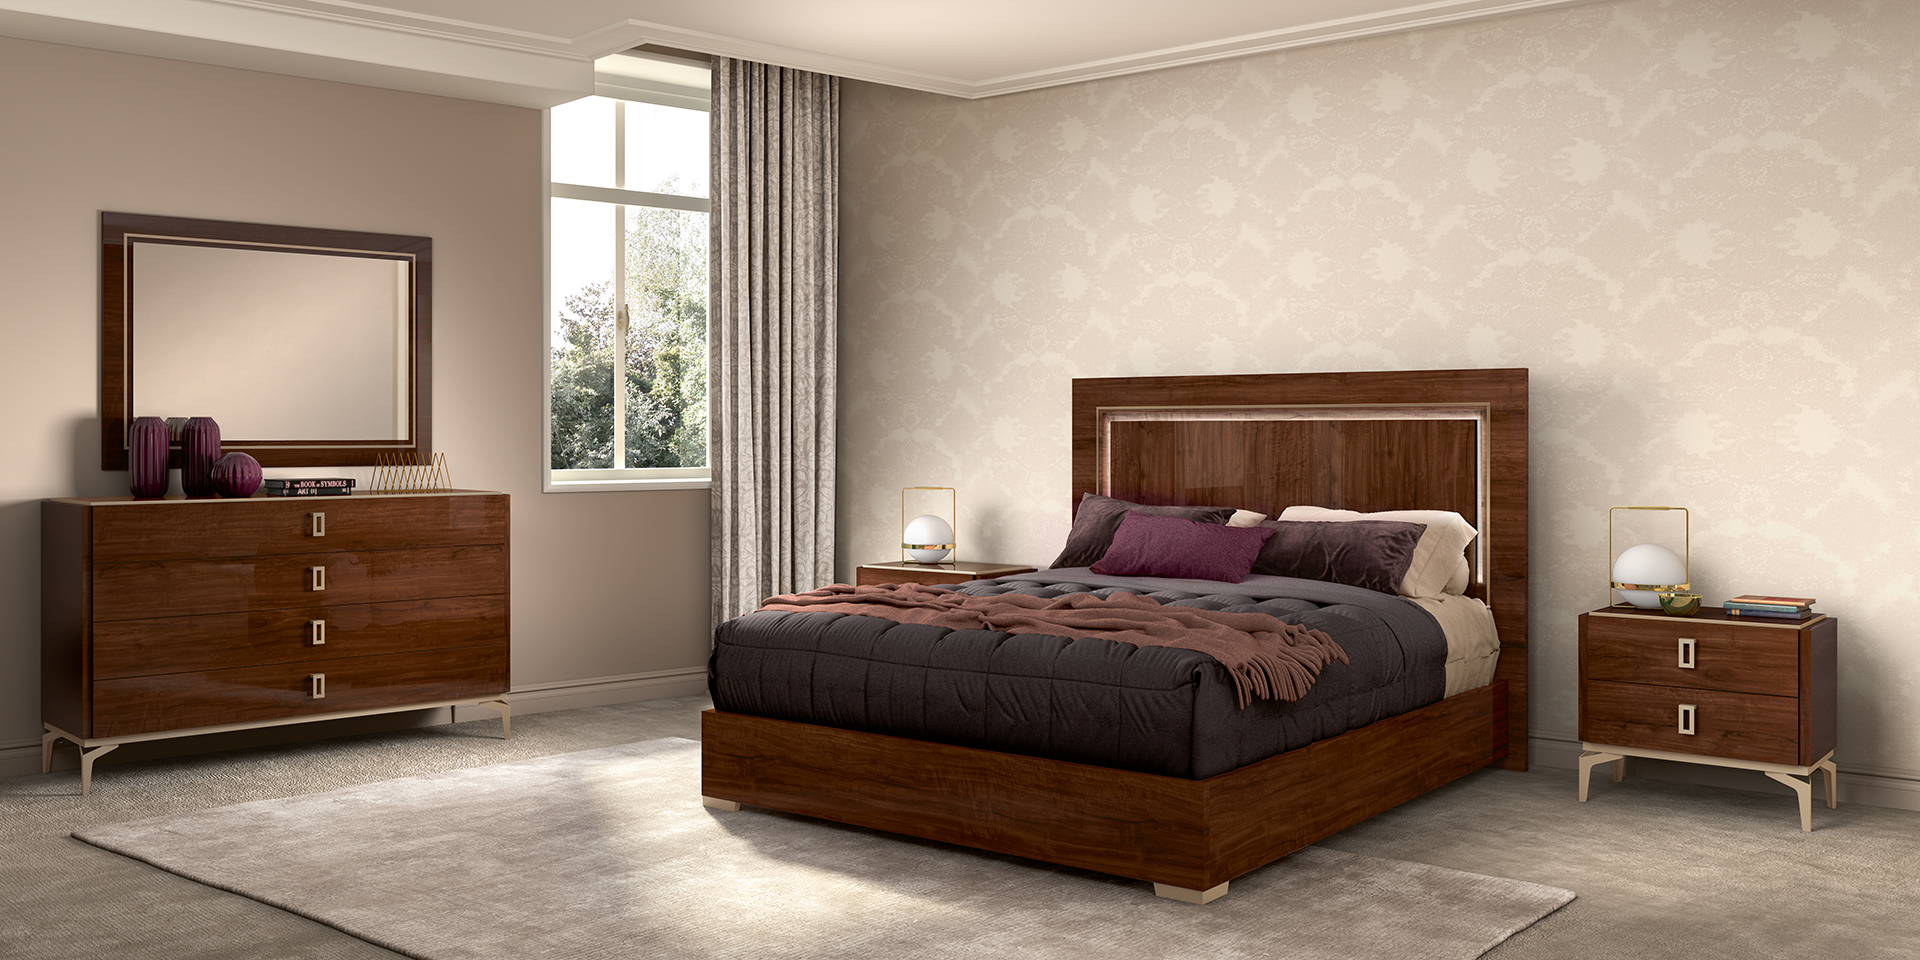 Brands Status Modern Collections, Italy Eva Bedroom Additional items